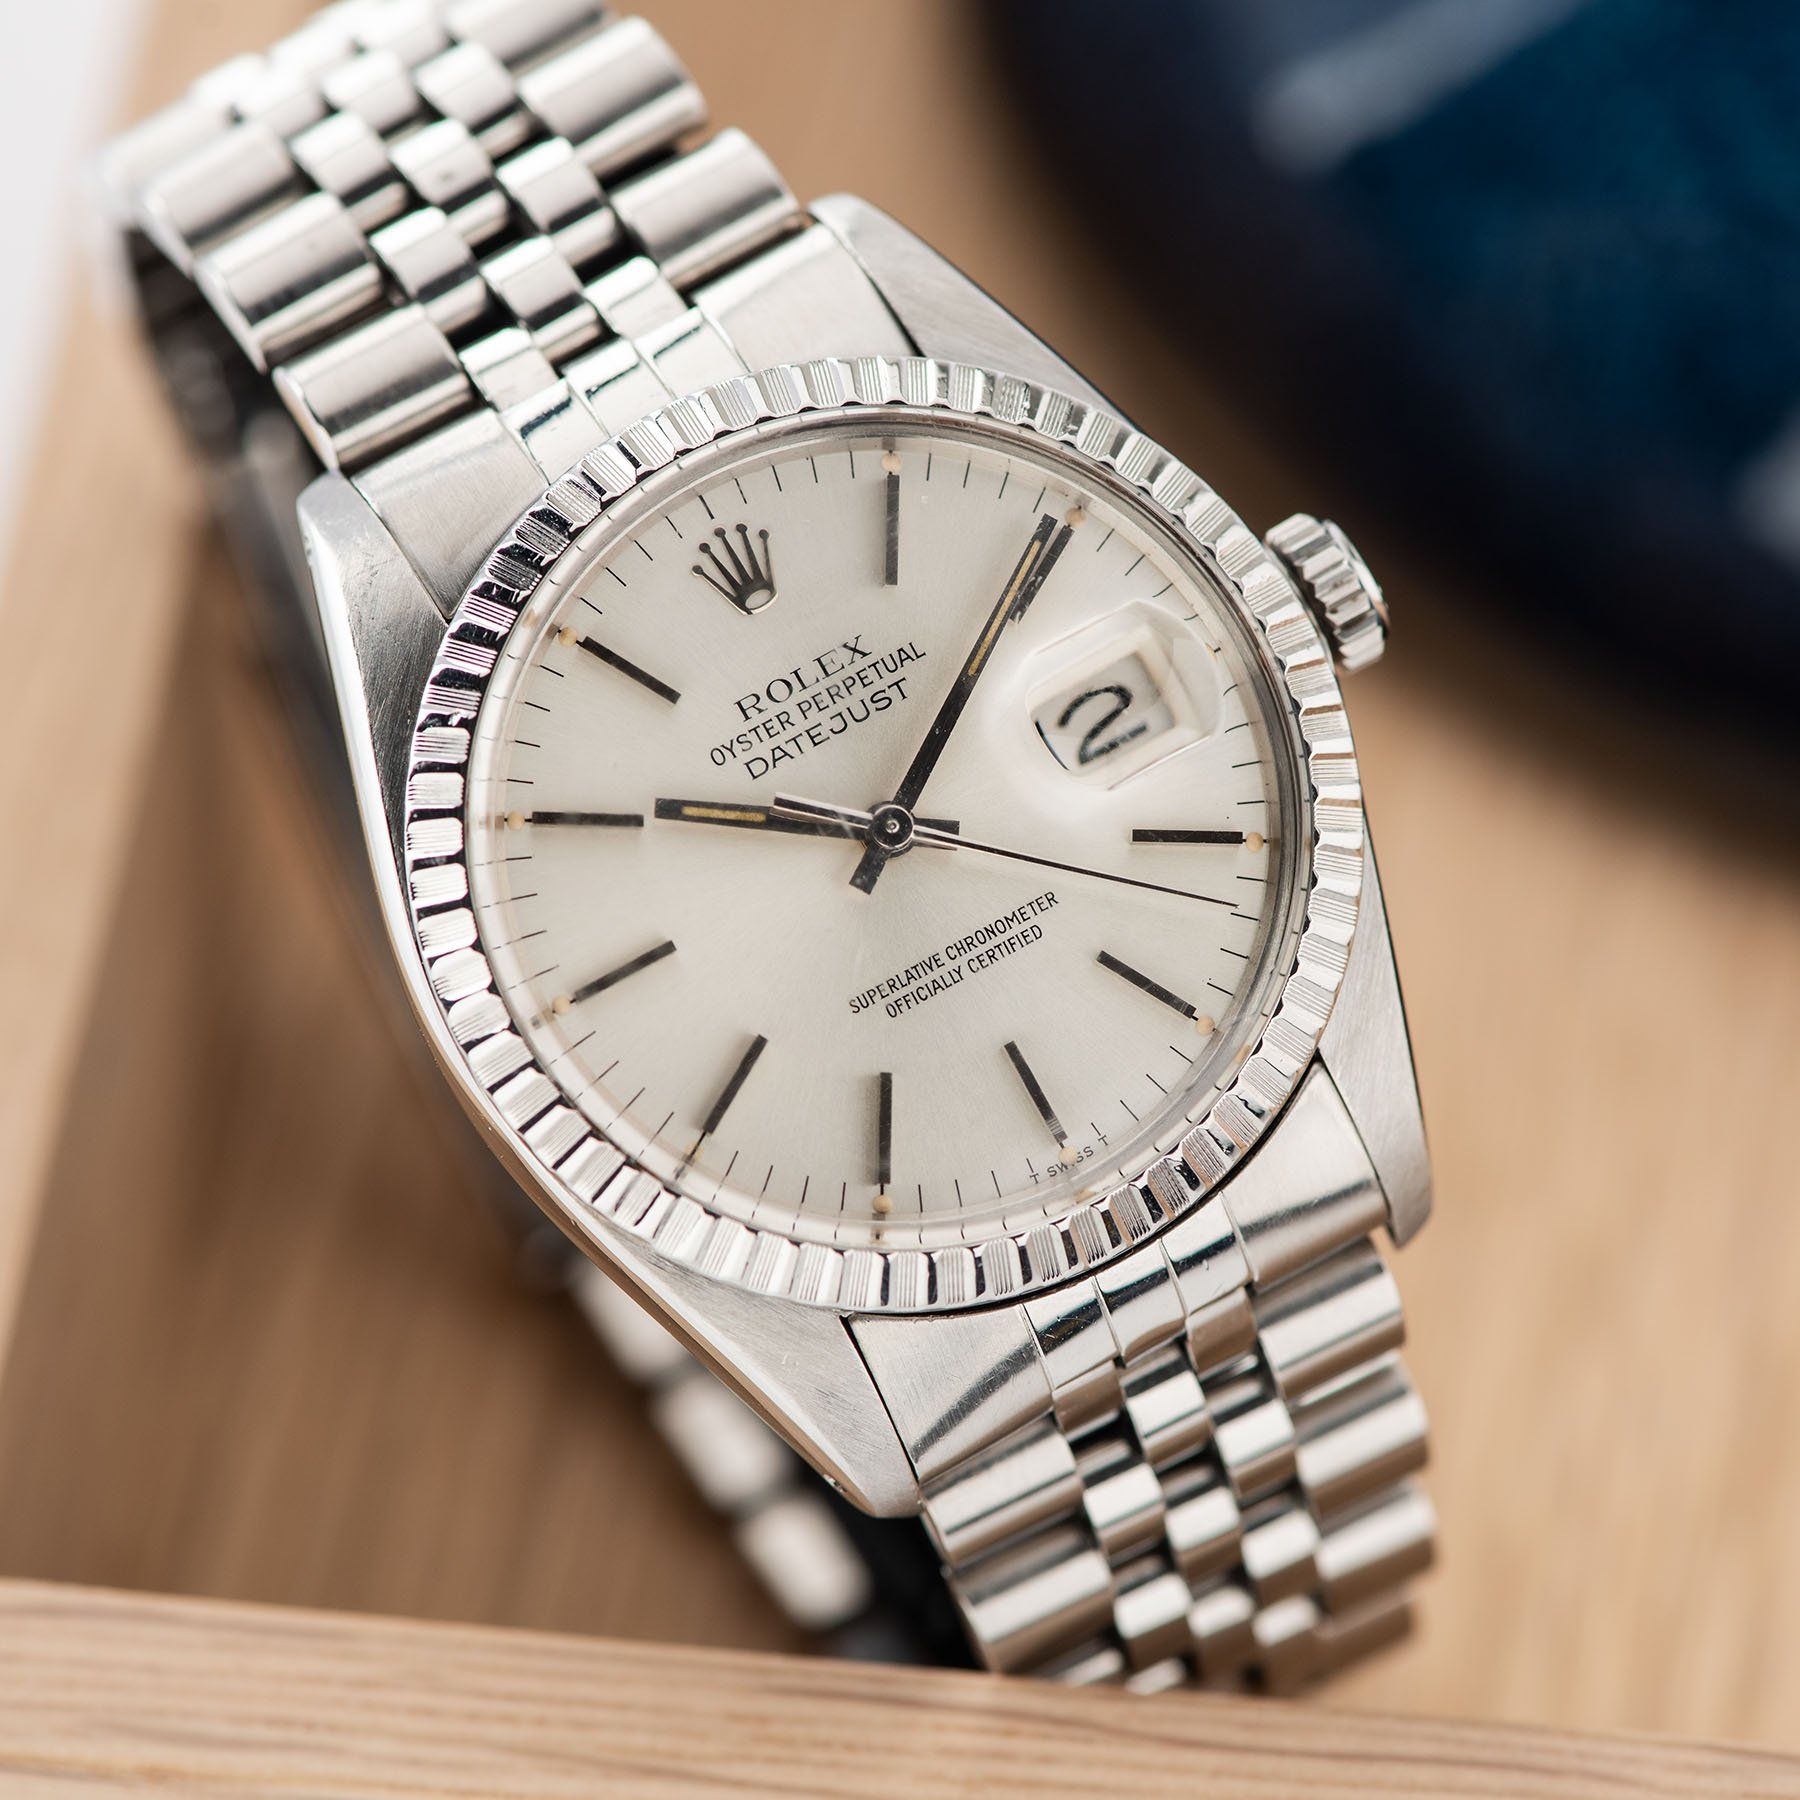 Rolex Datejust Silver Dial 16030 